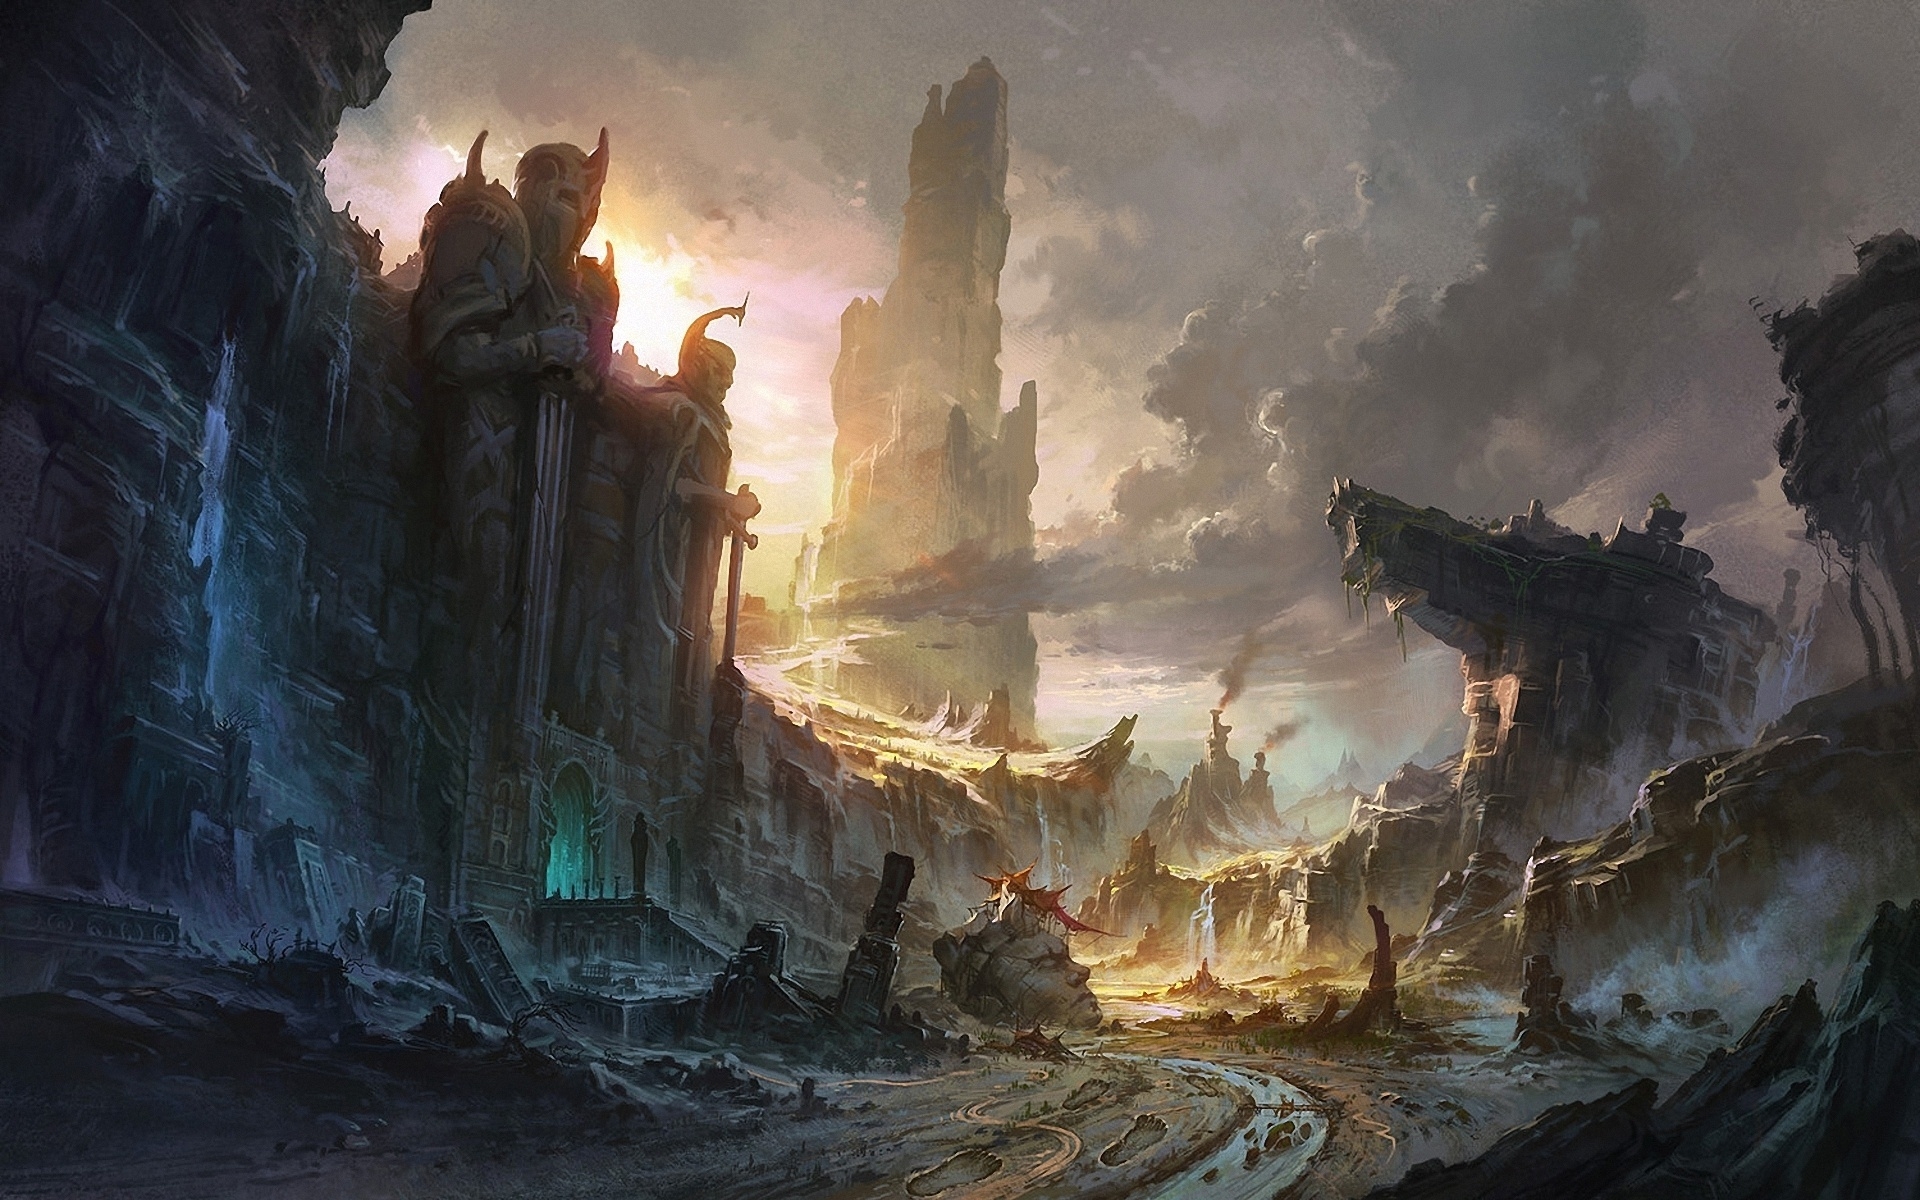 Cliffs Destruction City Wallpaper Hd Fantasy 4k Wallpapers Images Photos And Background